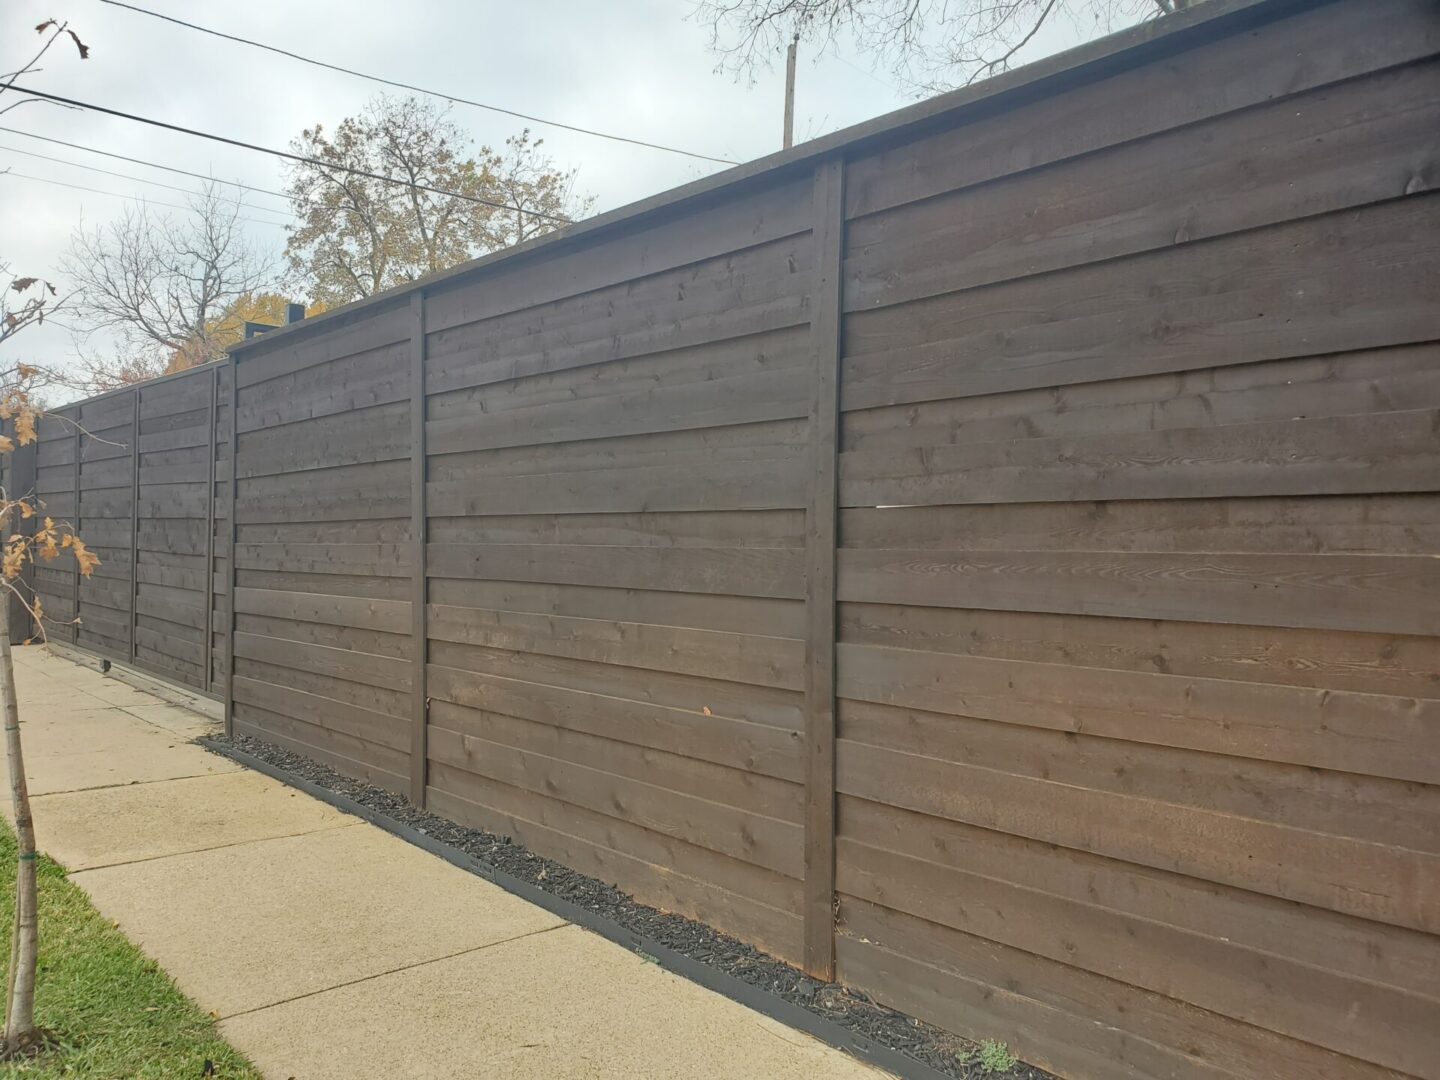 A wooden fence with no one in it